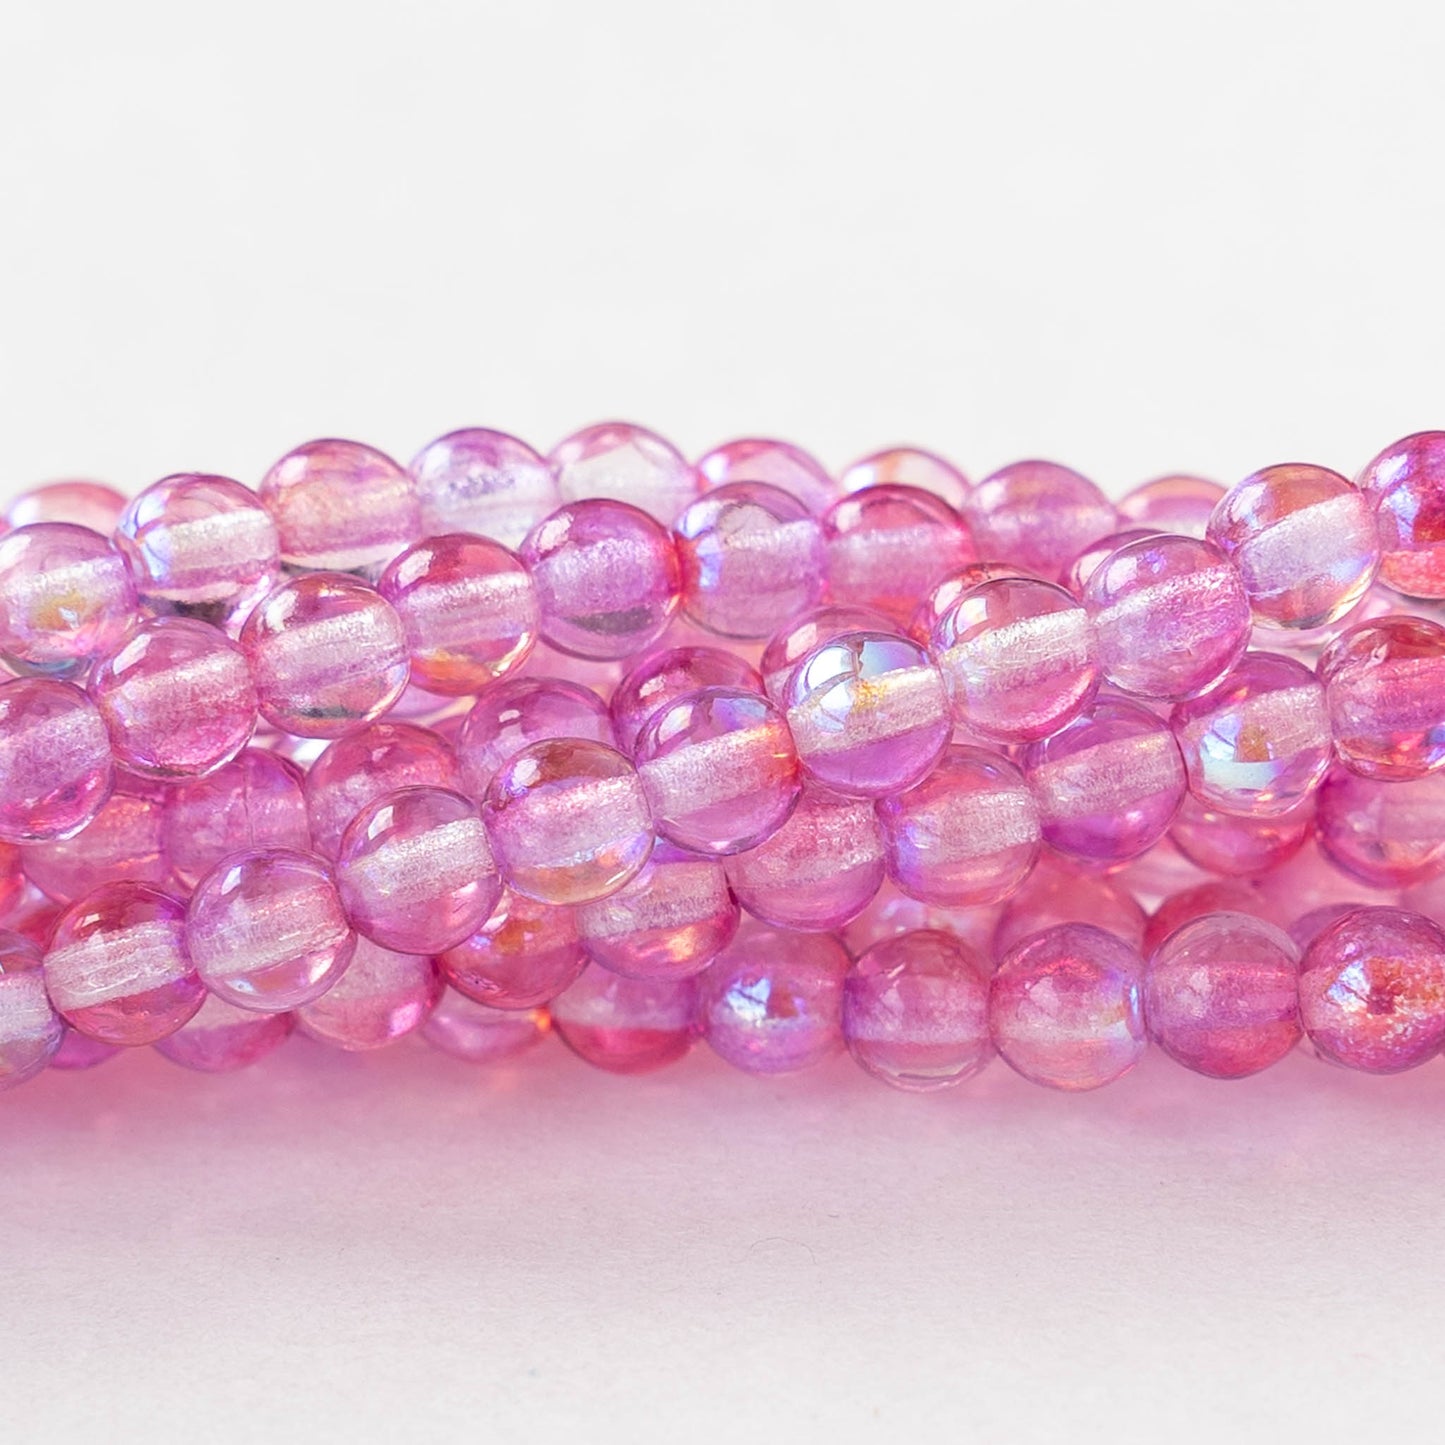 Load image into Gallery viewer, 4mm Round Glass Beads - Bubbly Pink - 50 Beads
